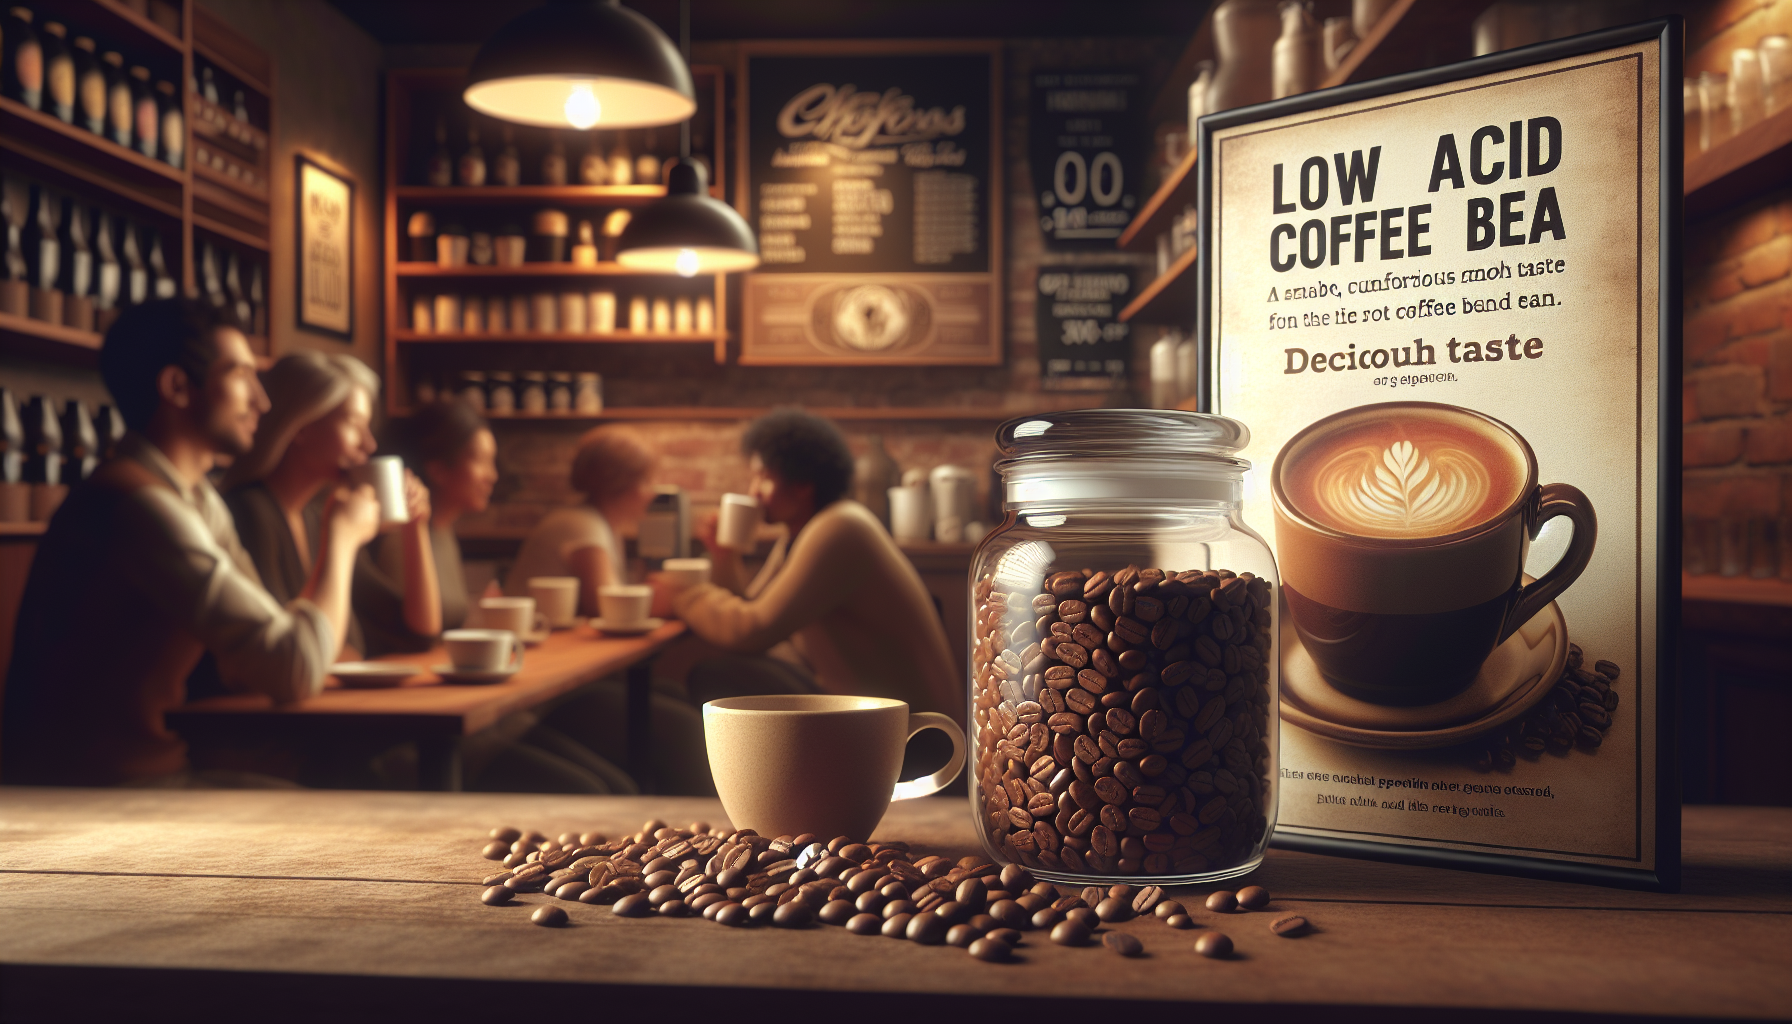 Visualize a warm scene of a coffee shop. In the foreground, a glass jar filled with low acid coffee beans, each uniquely polished, smooth, and rich in color. The aroma, comforting and inviting, permea